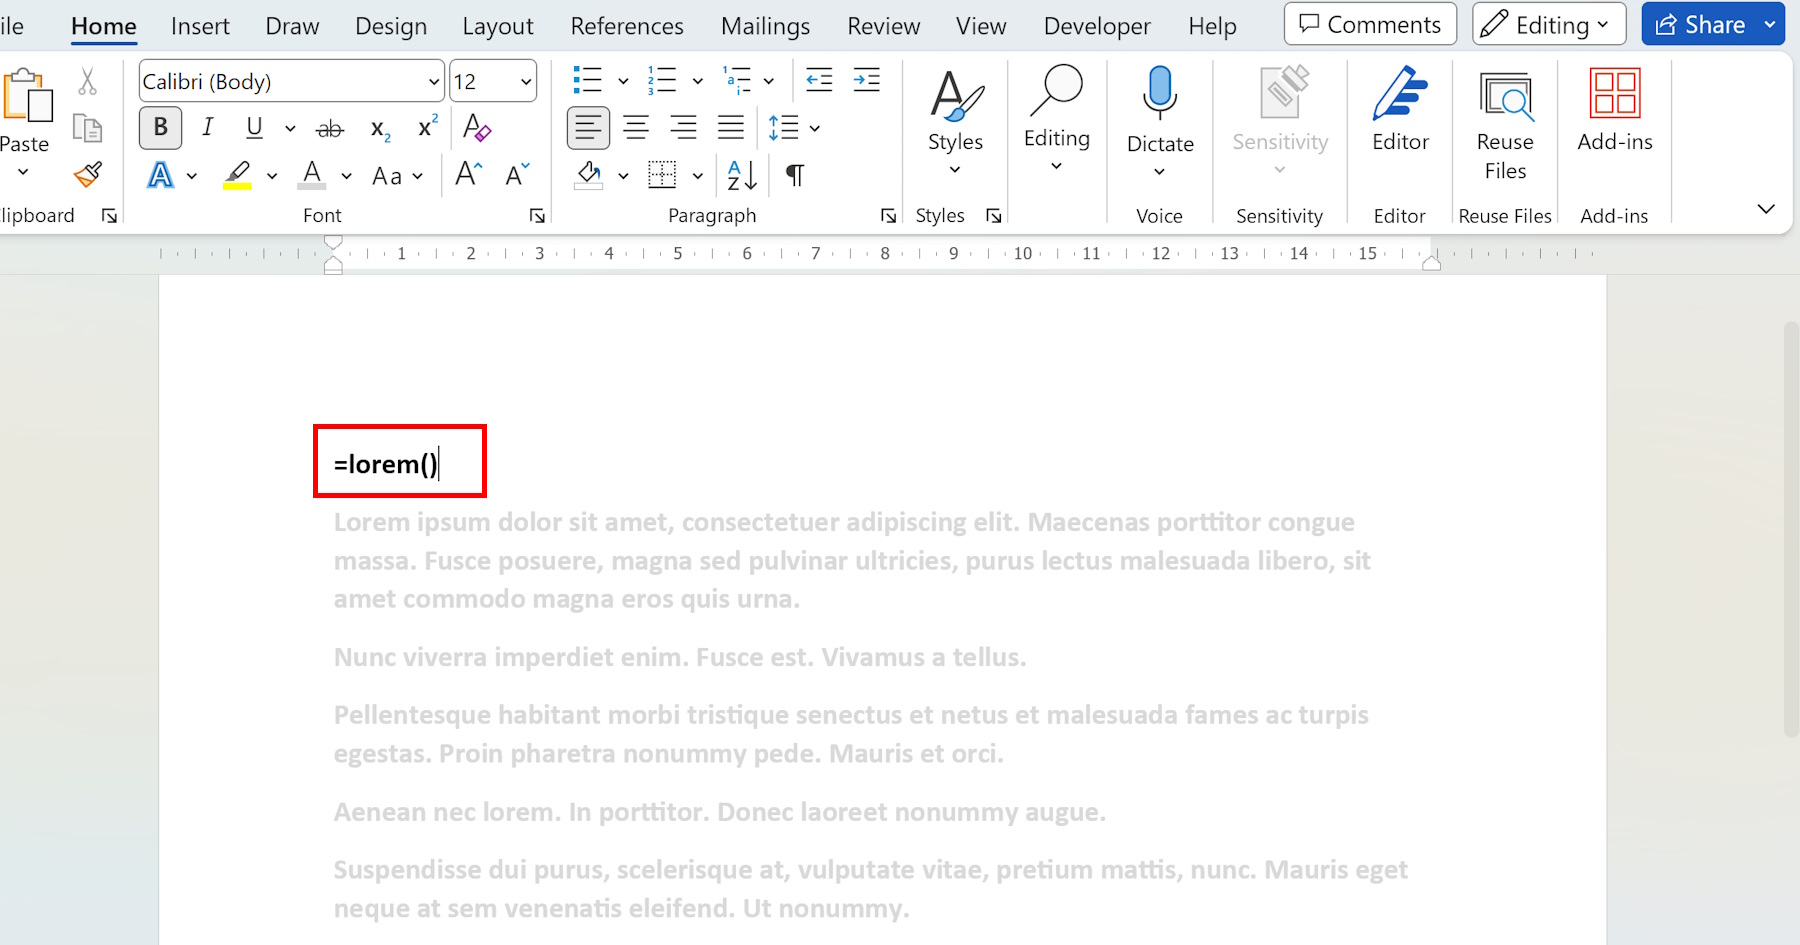 Discover the concept of placeholder text in Word and learn how to use it to enhance productivity and save time. Find out practical use cases and formatting options for placeholder text in Microsoft Word.